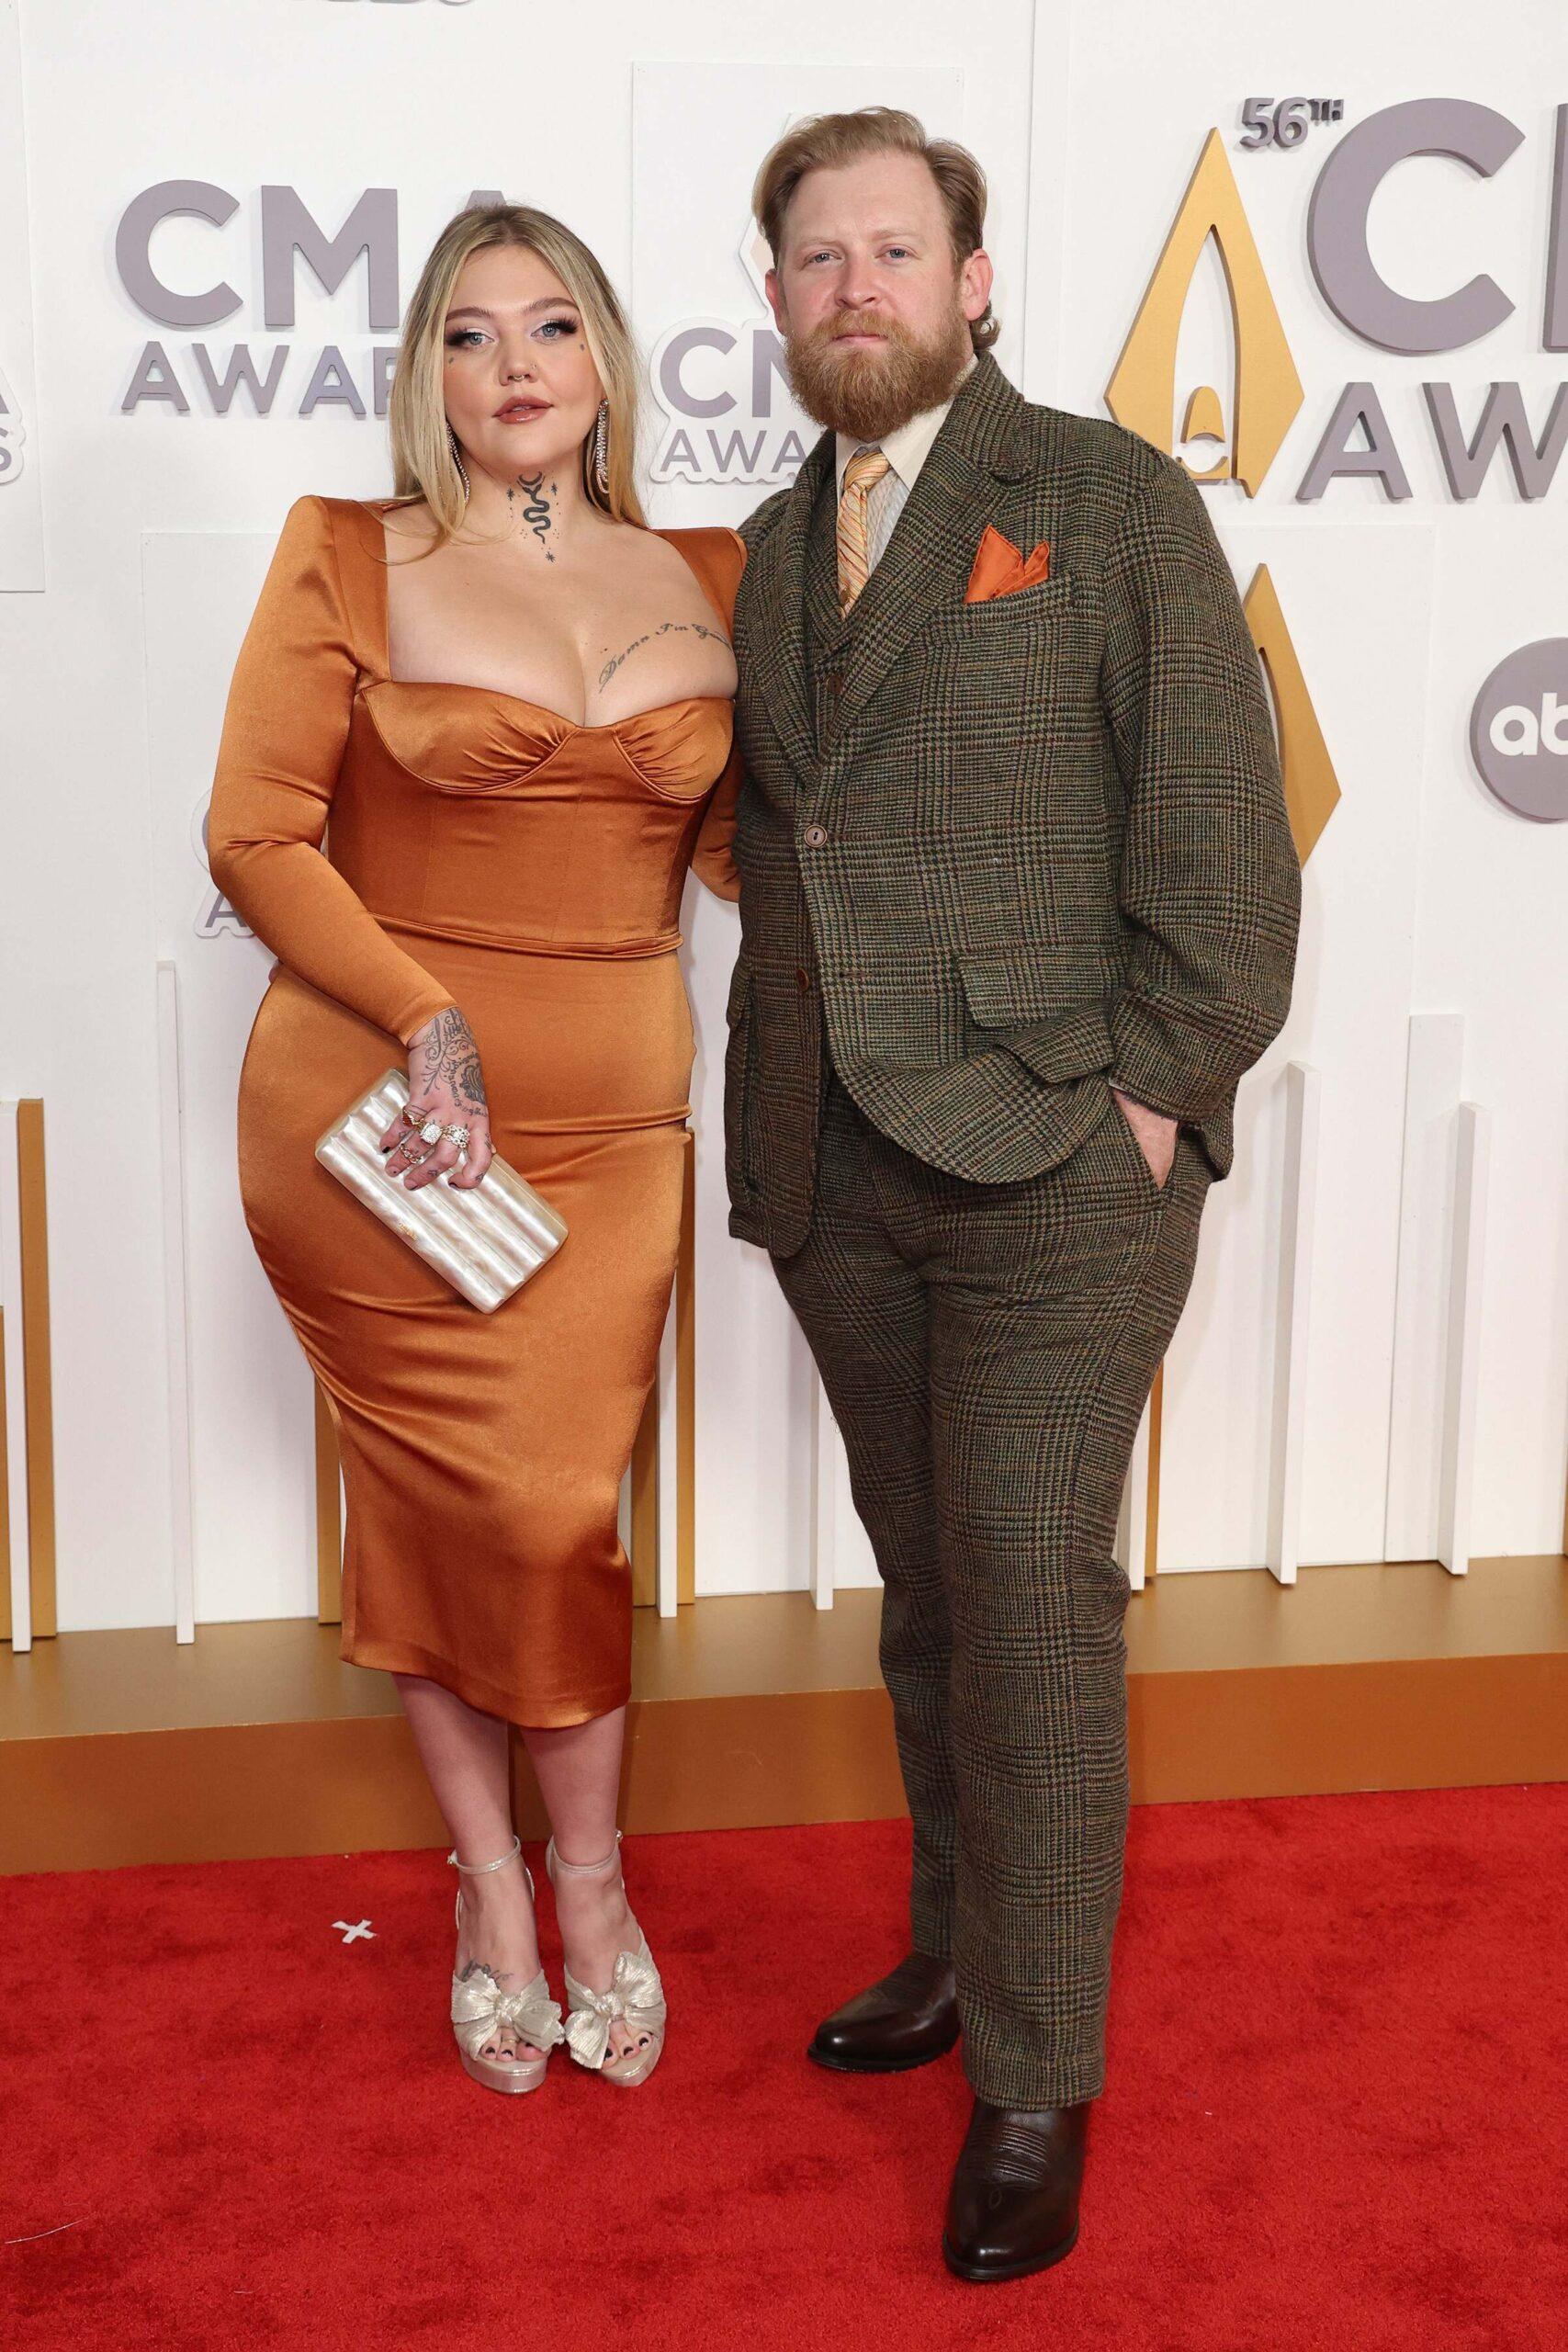 Elle King and Dan Tooker at the 56th Annual CMA Awards - Arrivals